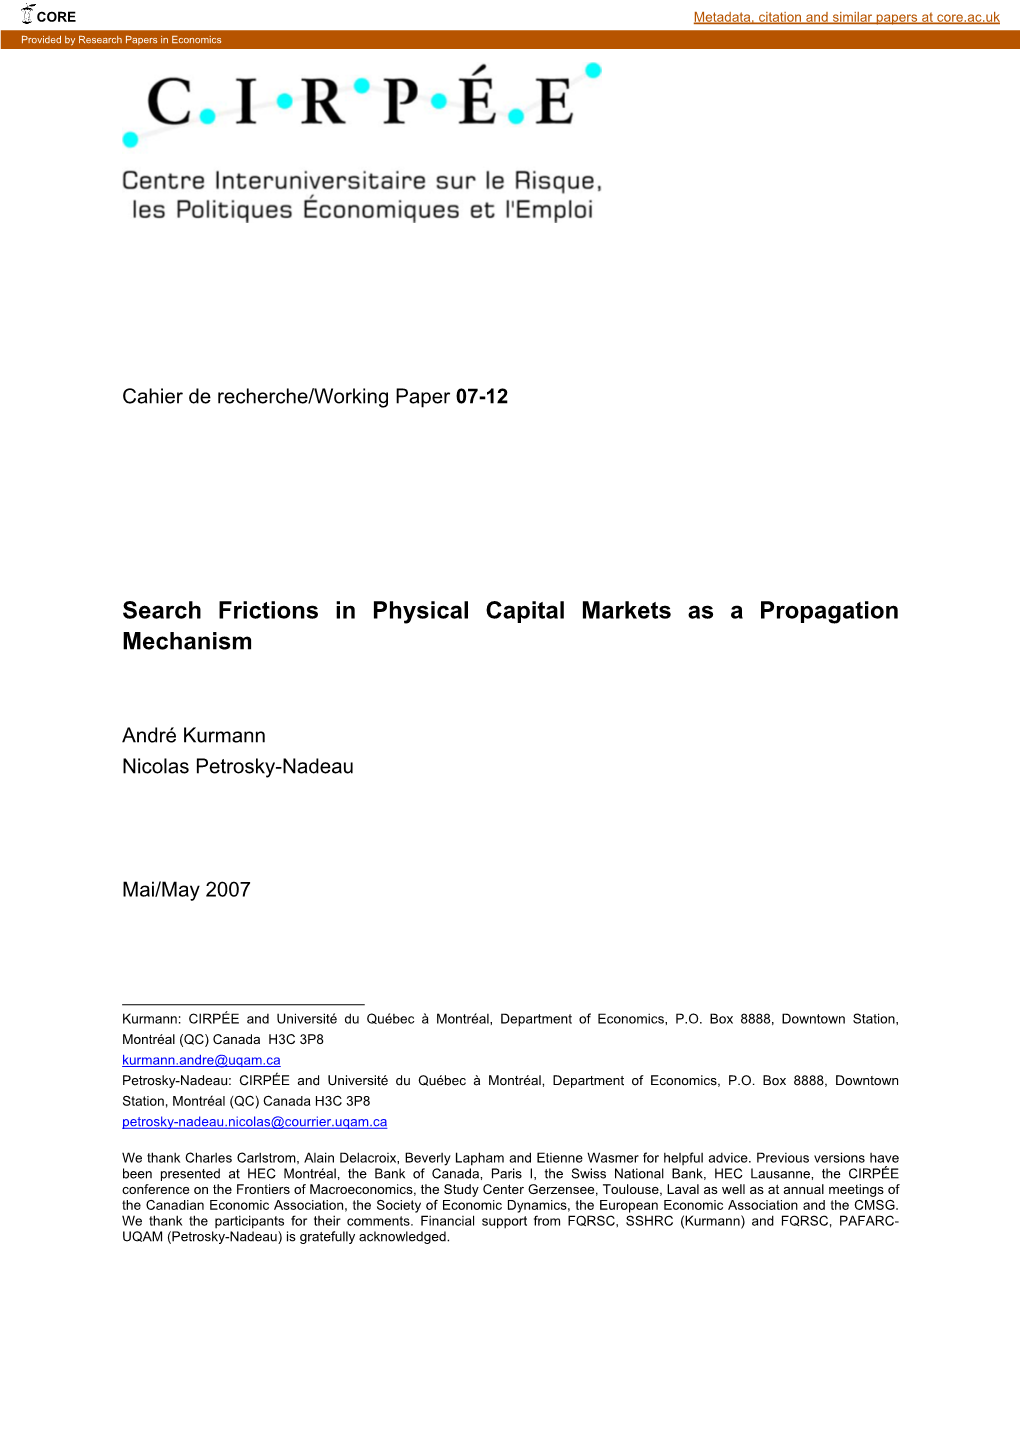 Search Frictions in Physical Capital Markets As a Propagation Mechanism